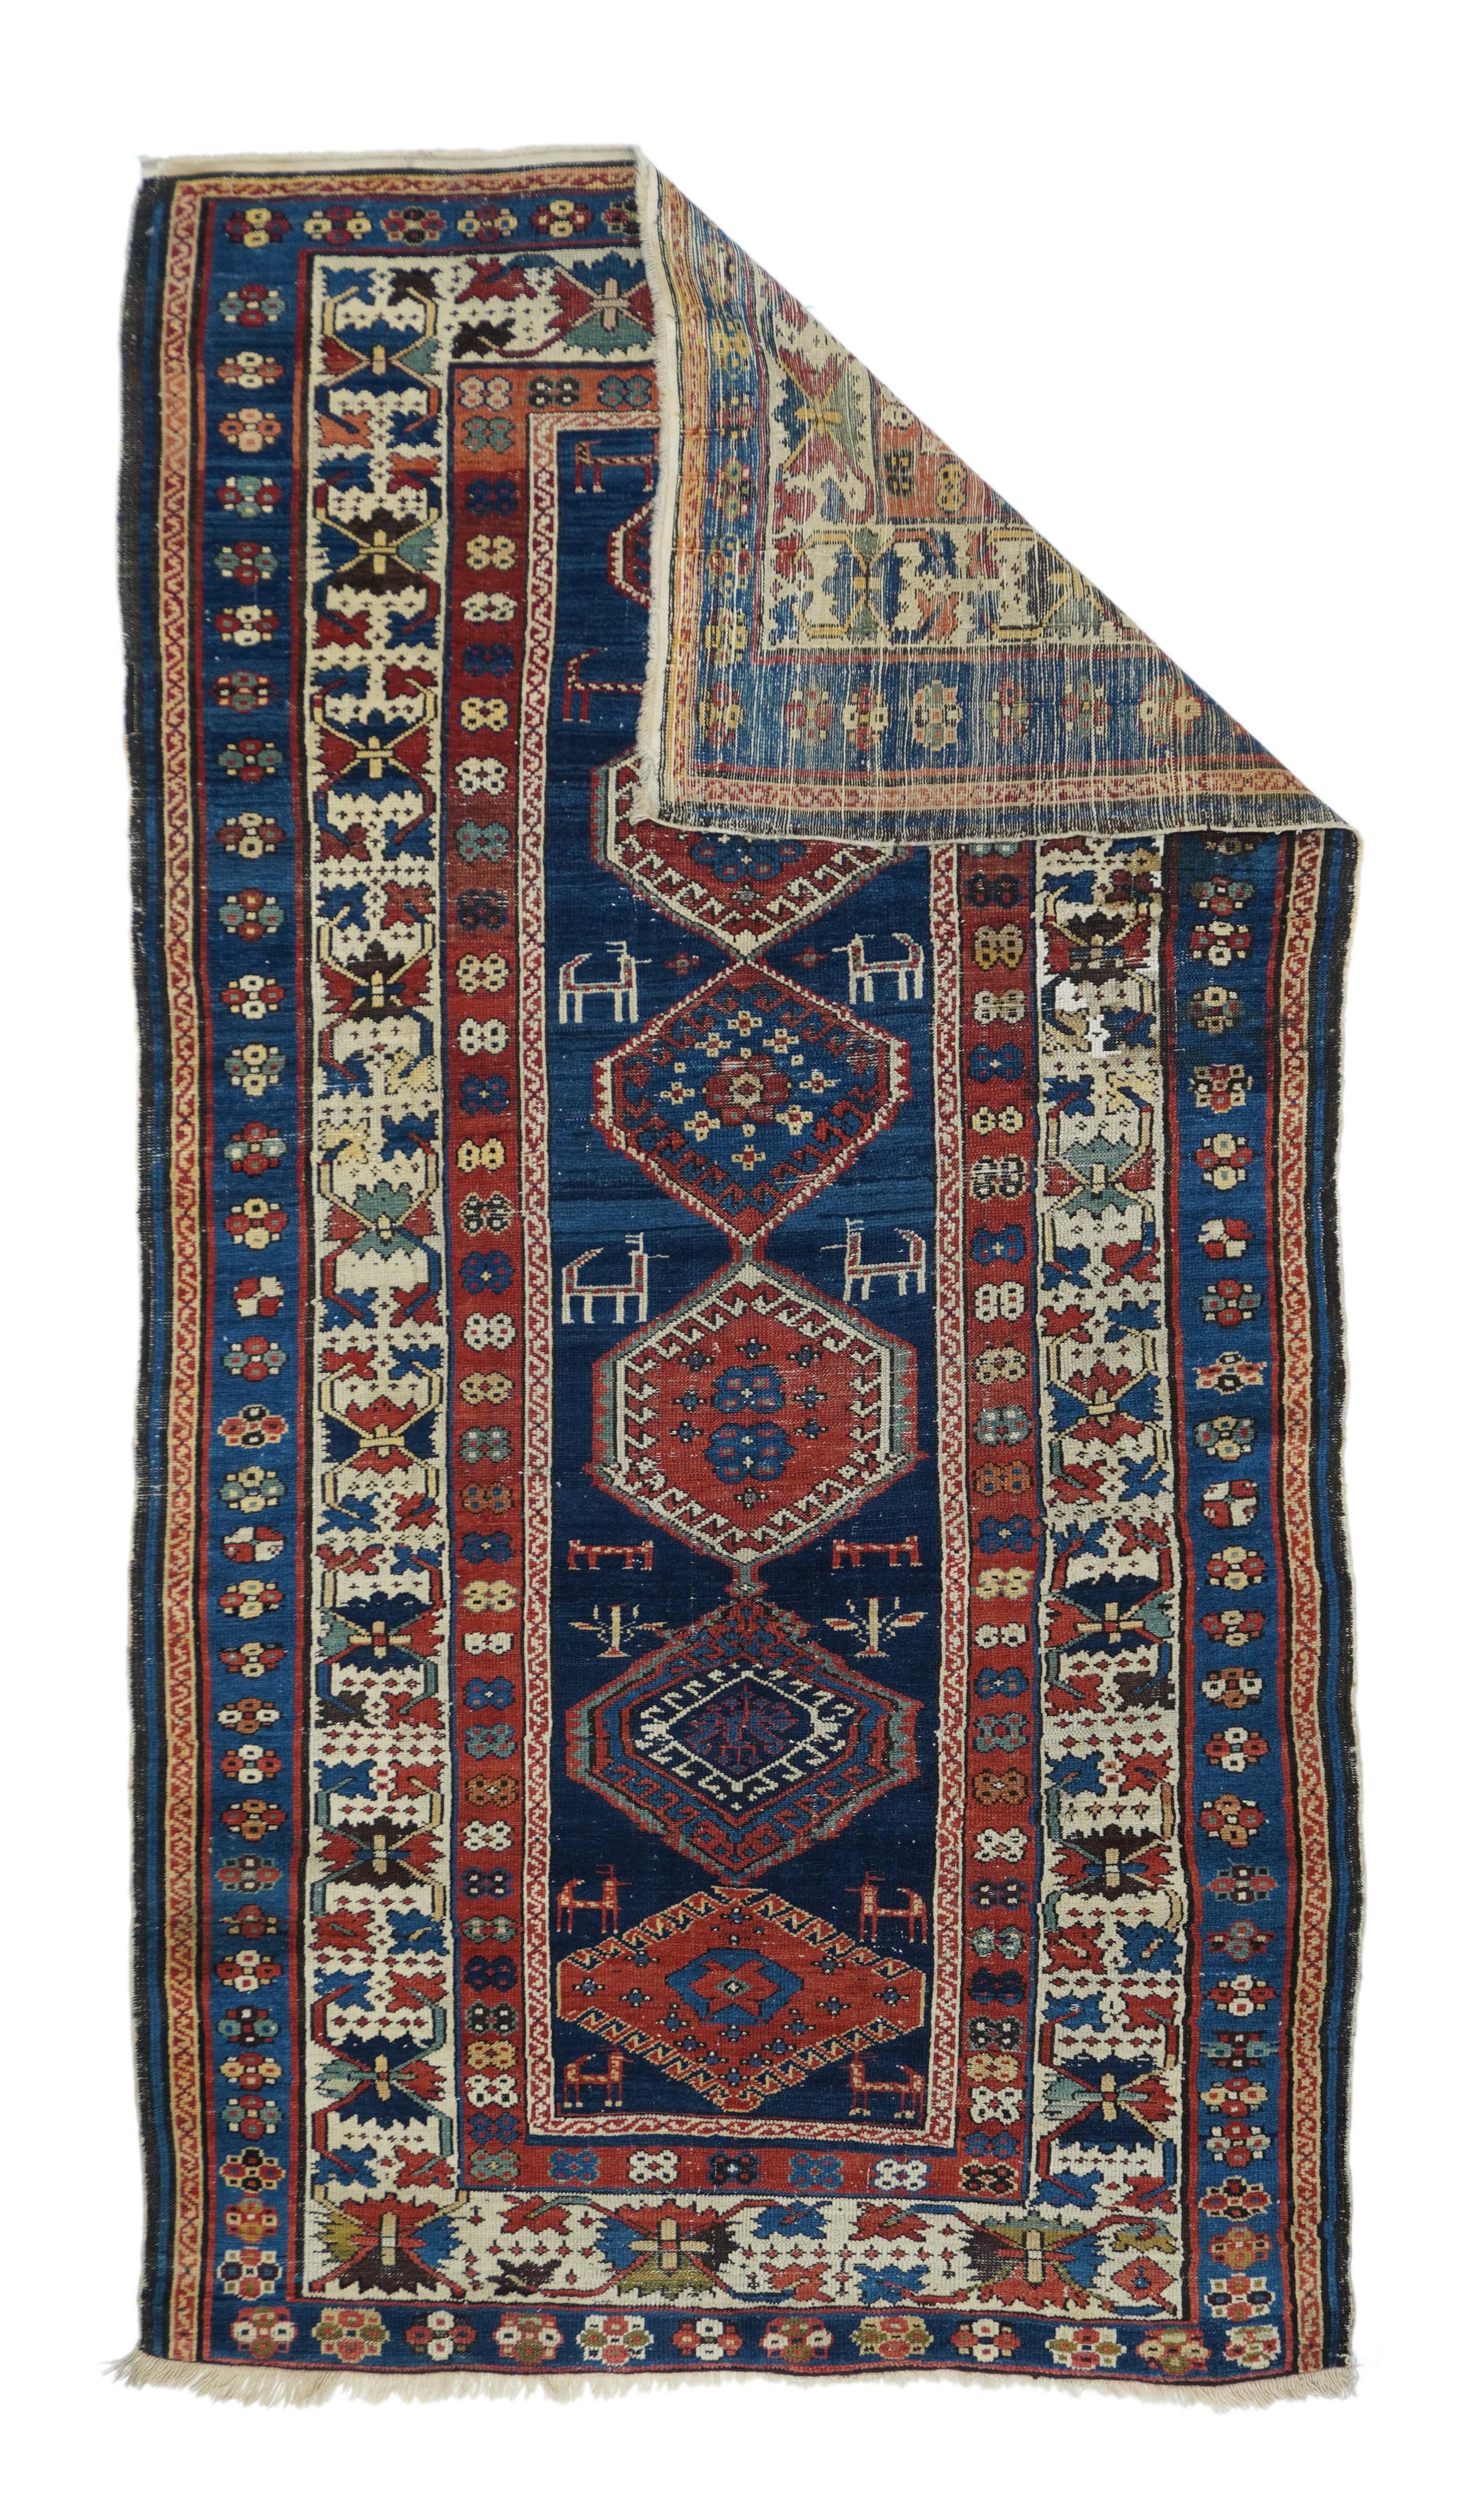 This elongated east Caucasian scatter presents an abrashed, deep sapphire field centred by a pole medallion of six red and cream hexagons with hooked sub-hexagons, and flanked by pairs of rustic animals. Main ivory ground 